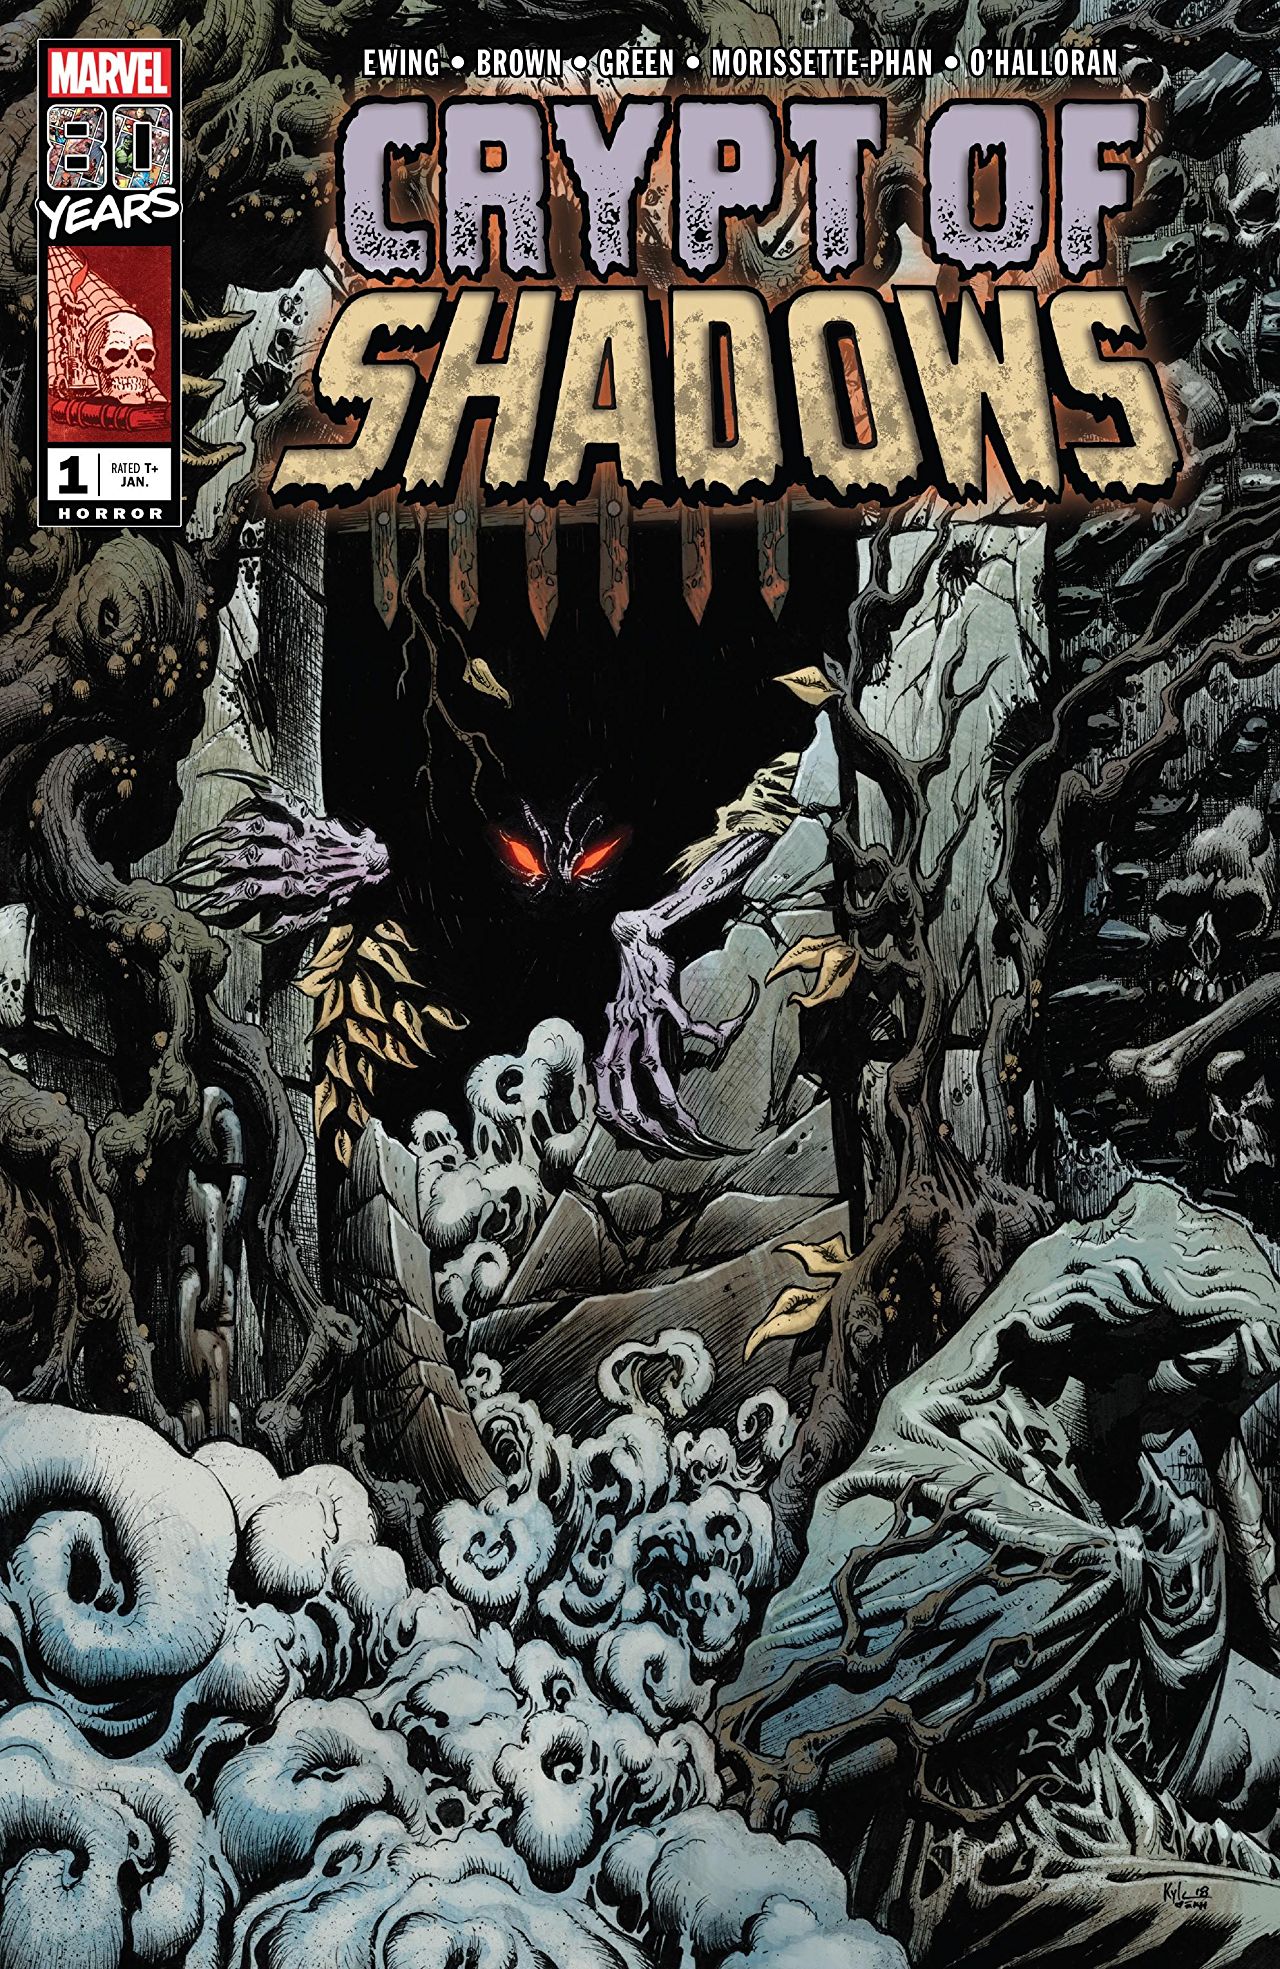 Marvel Preview: The Crypt of Shadows #1